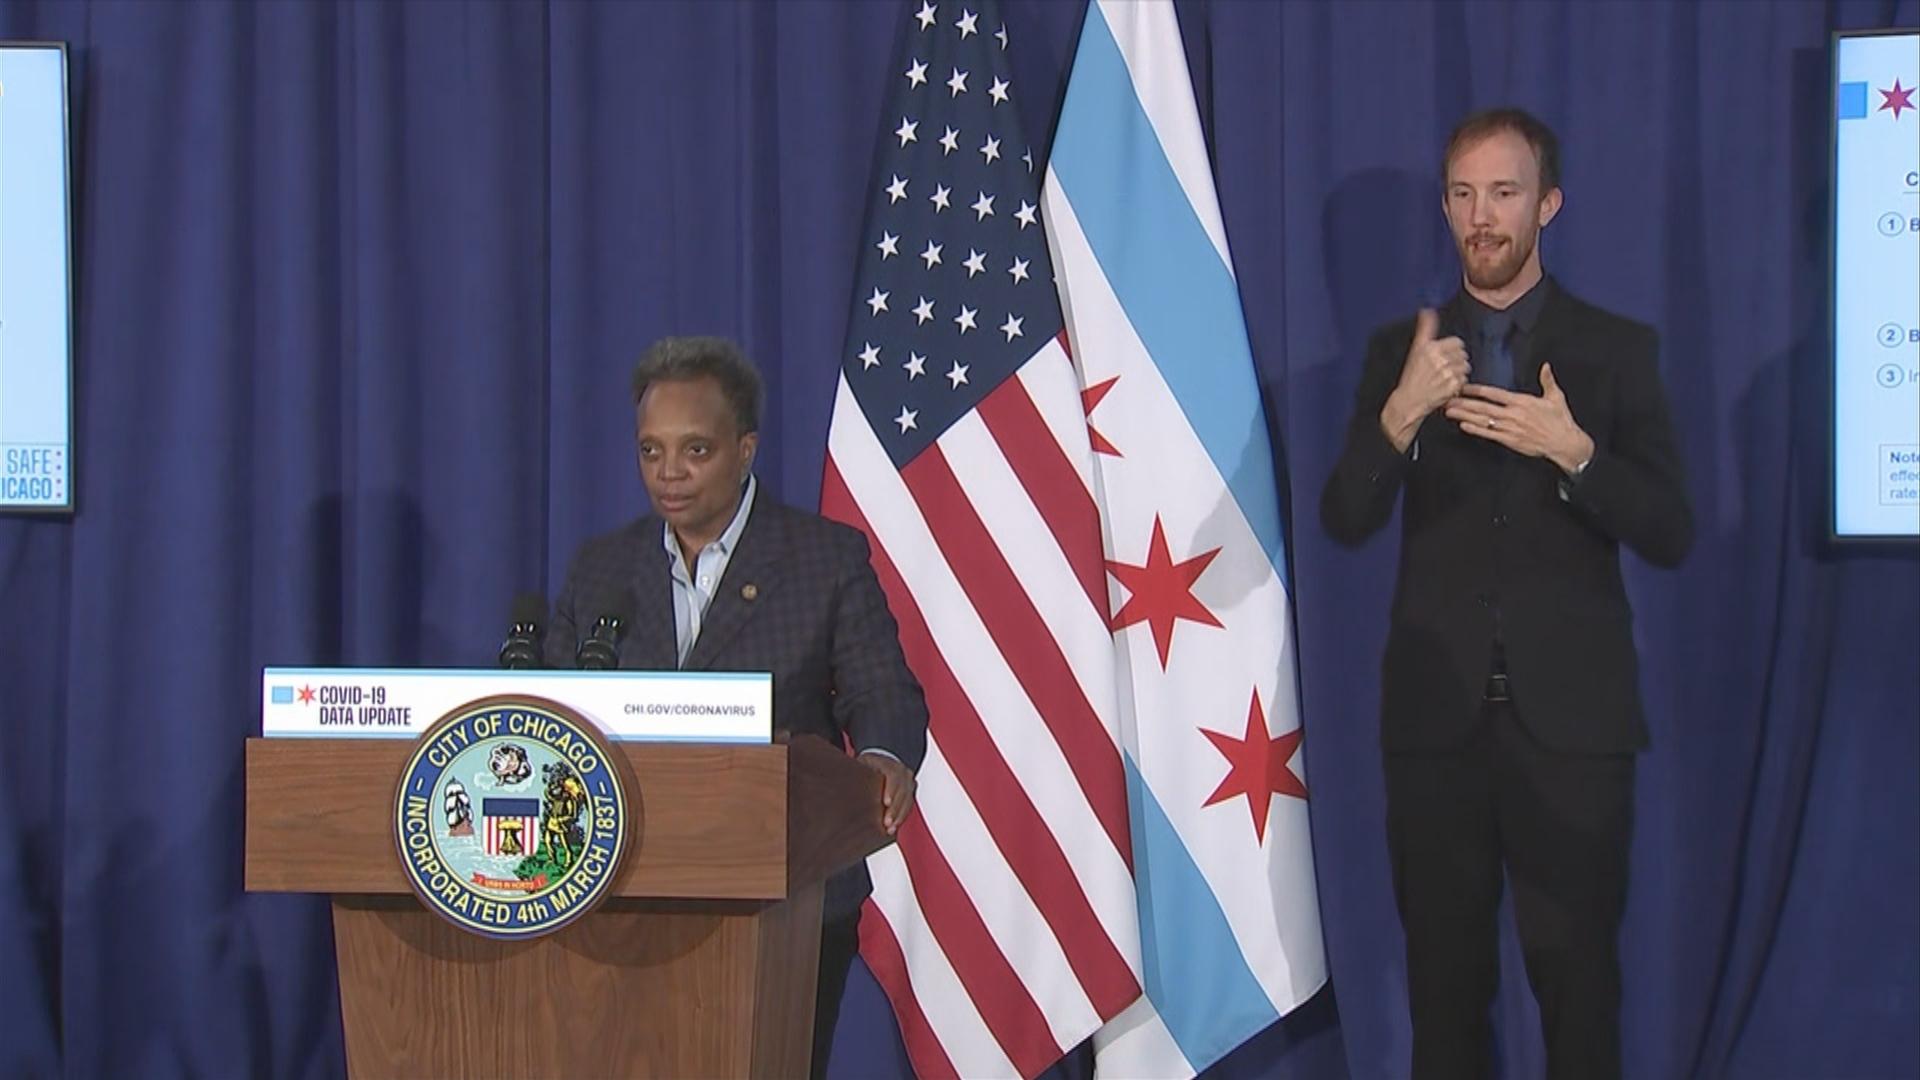 Mayor Lori Lightfoot announces new restrictions Thursday, Oct. 22, 2020 to curb the spread of the coronavirus. (WTTW News)